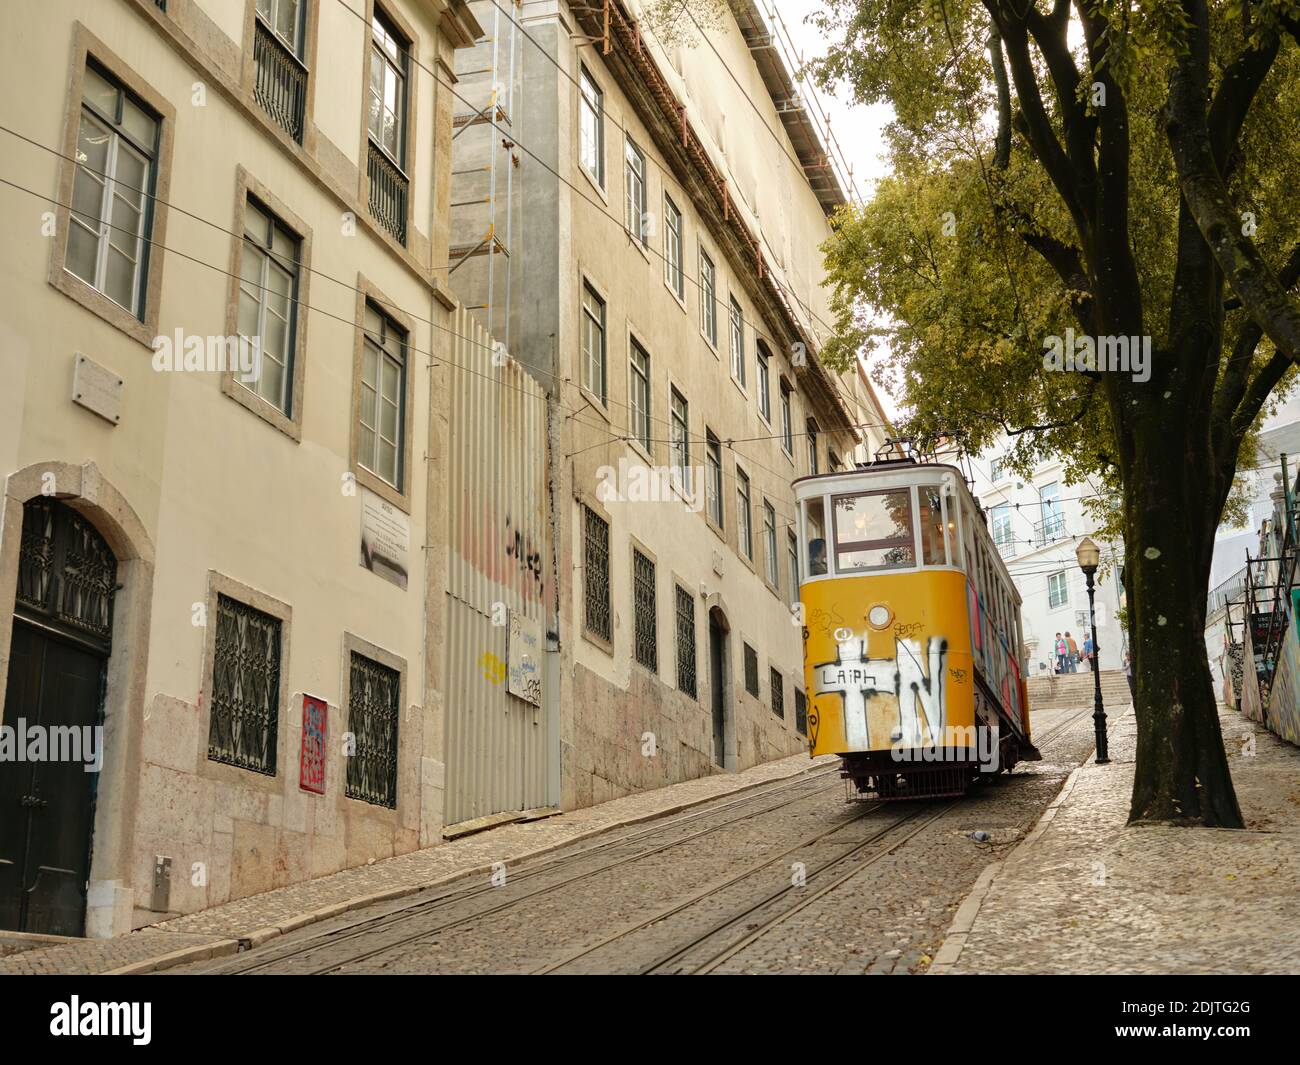 Tram going up hill in Lisbon Stock Photo